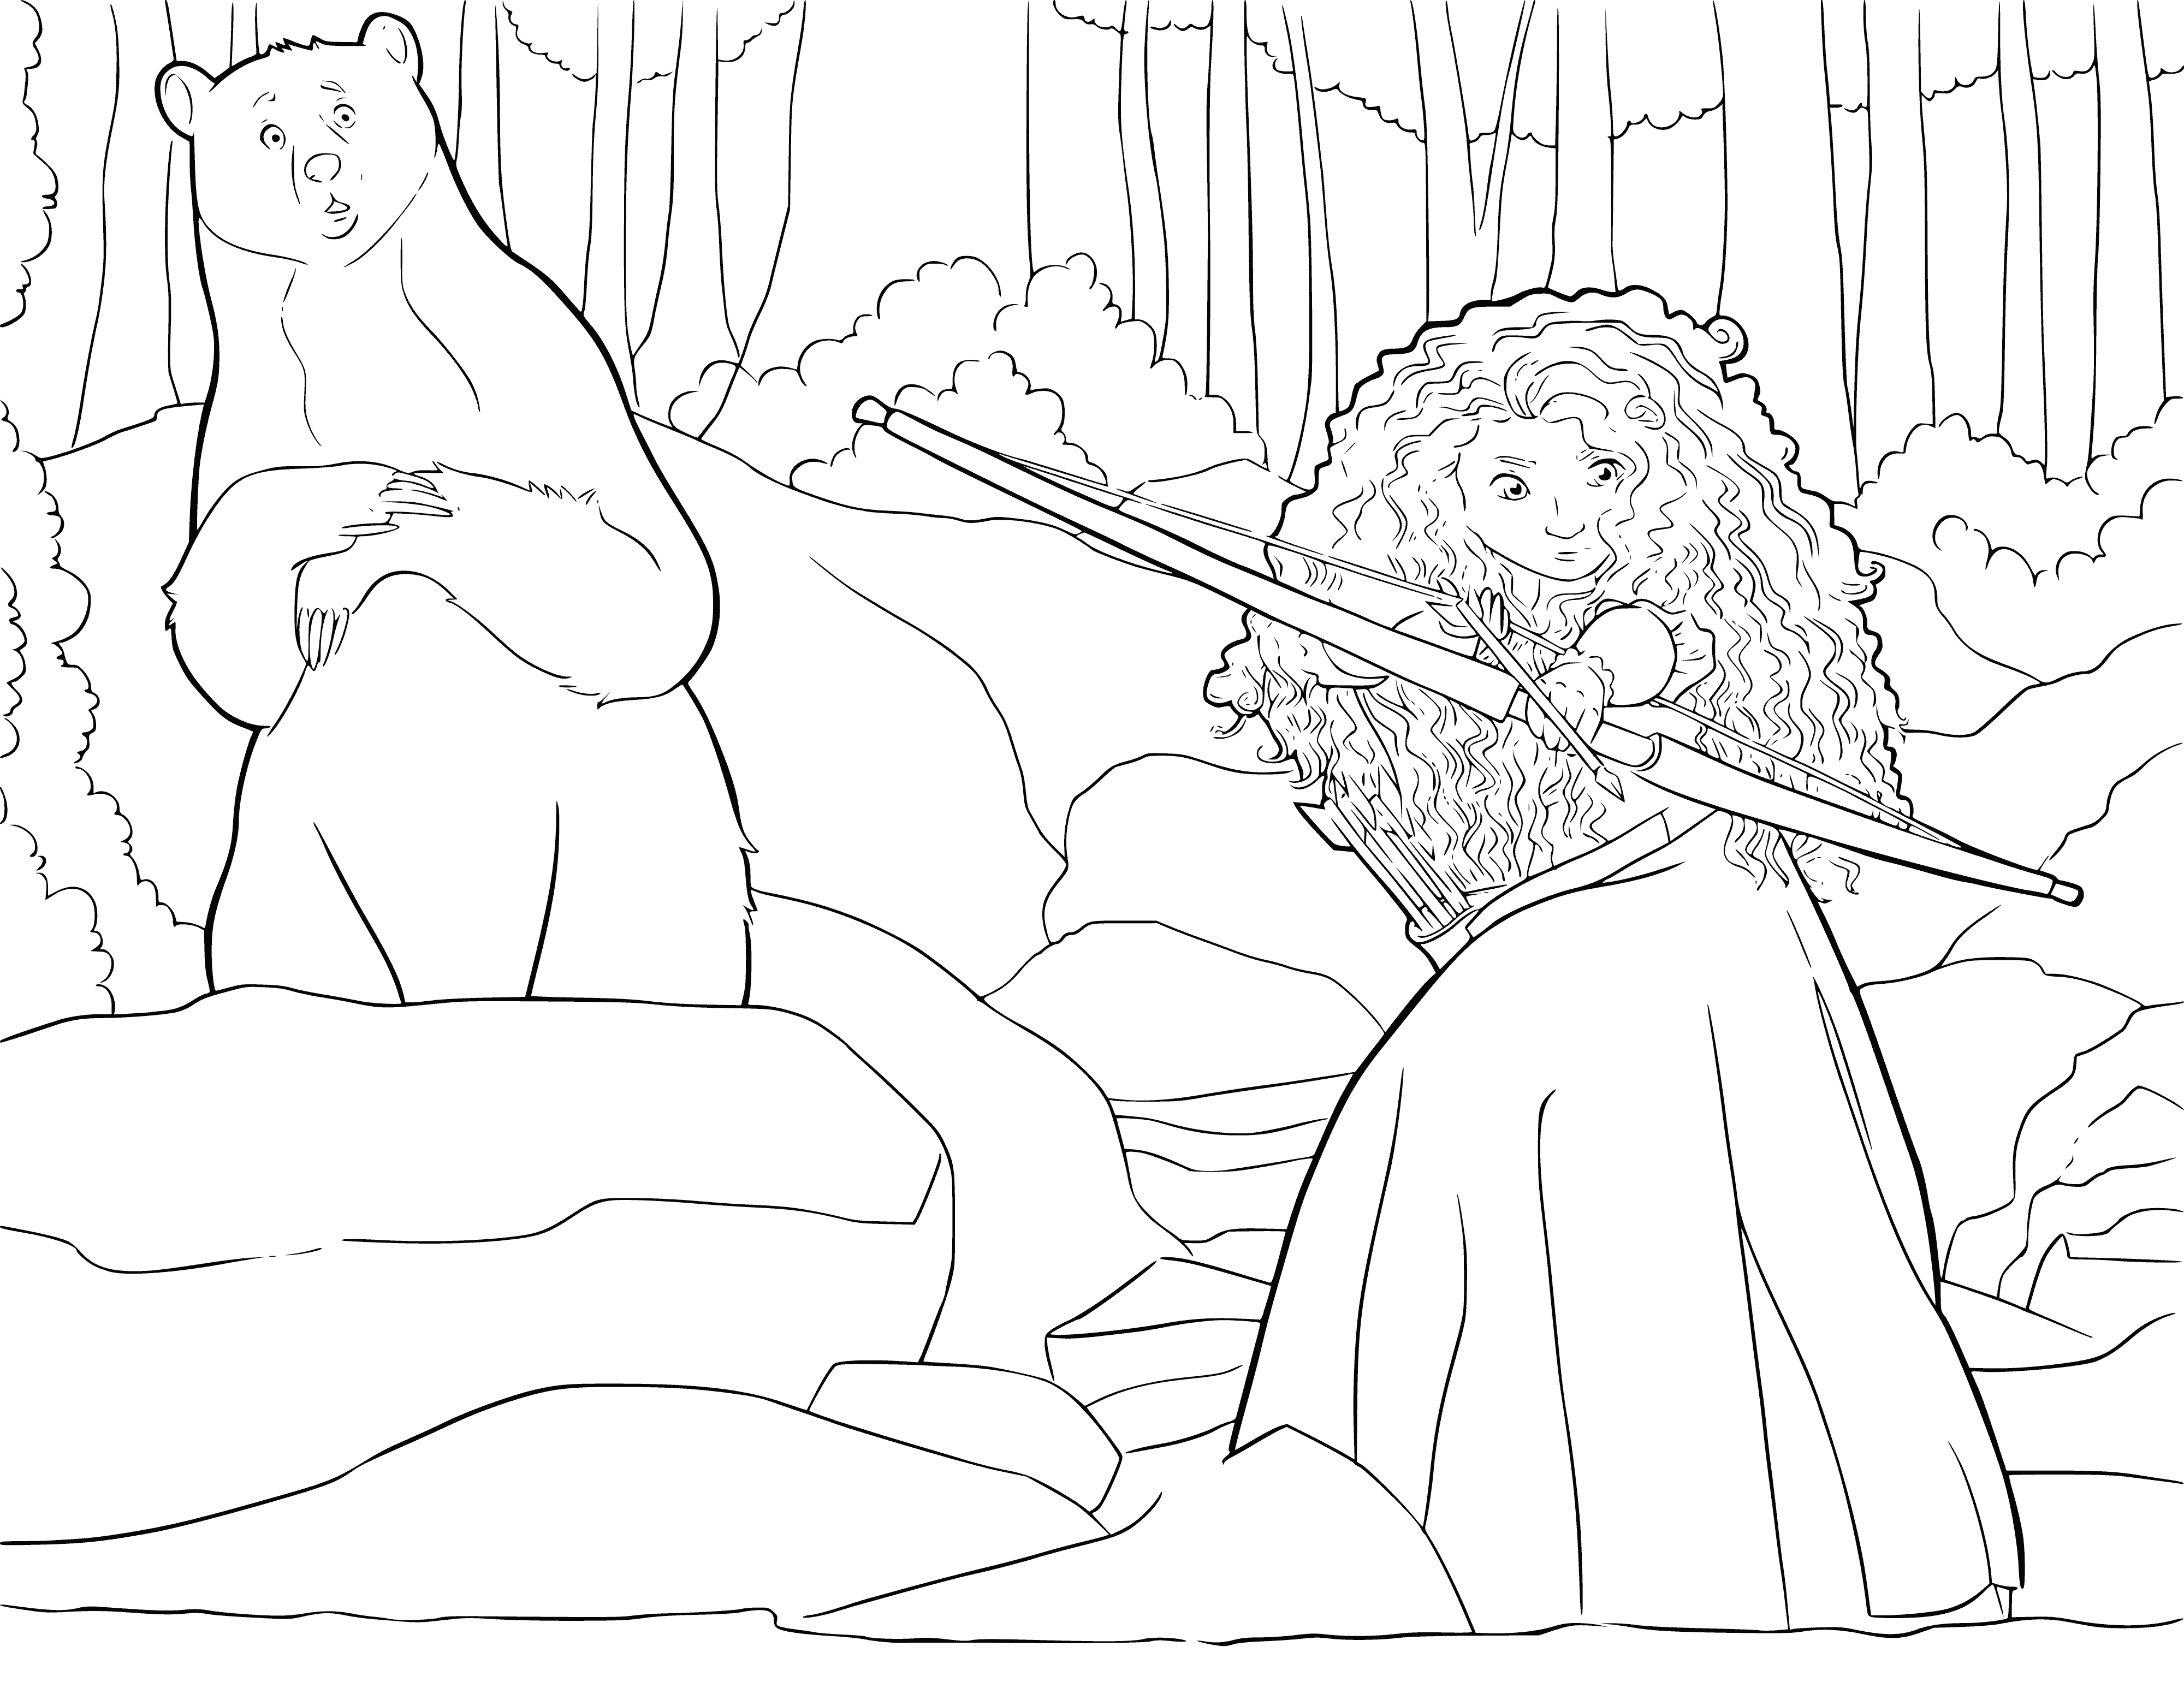 coloring page: Girl with bow & arrows stands in a forest, ready to shoot 3 arrows at target.